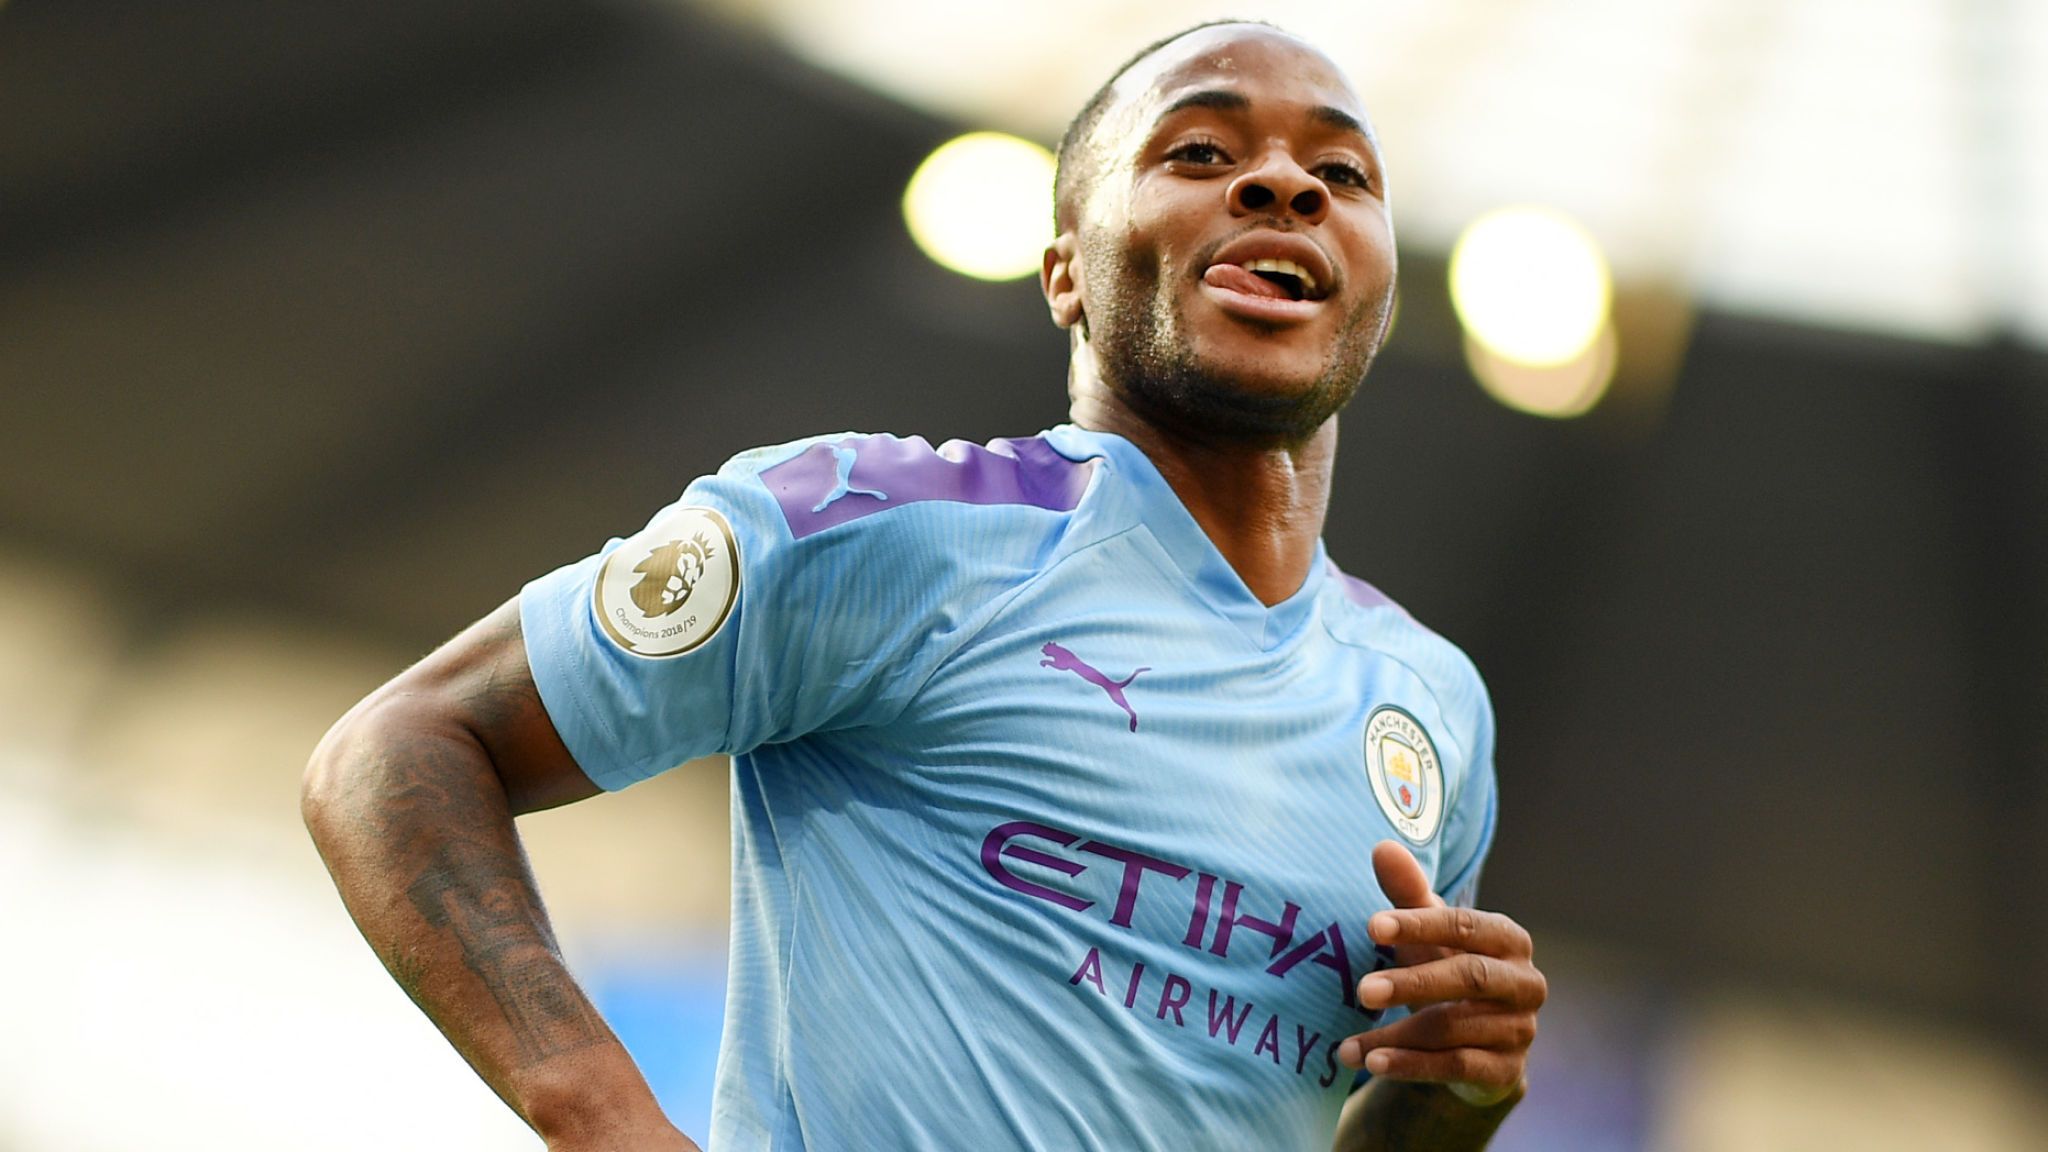 real will pay 180m for sterling - Bóng Đá